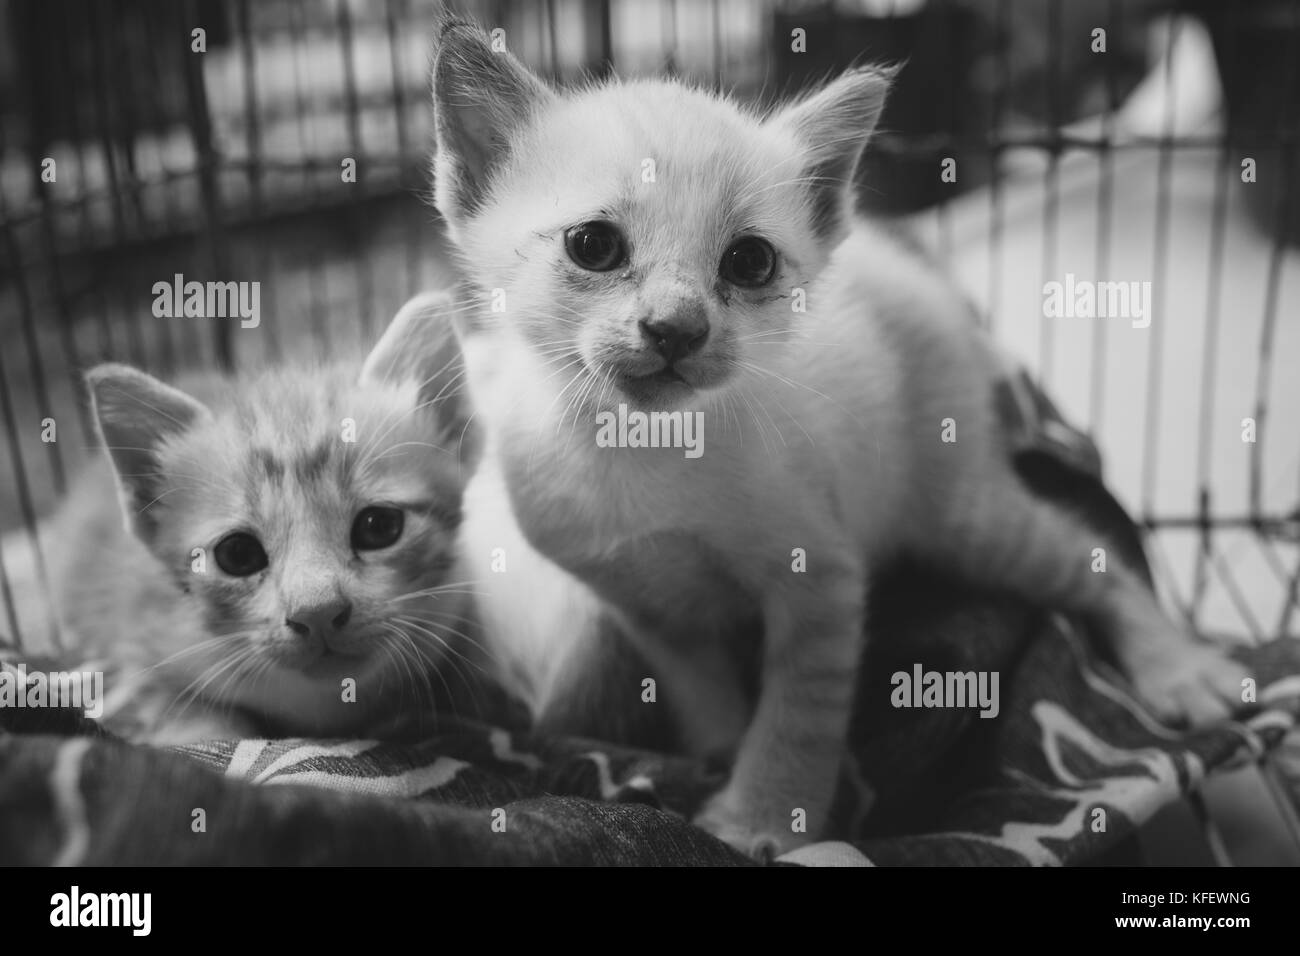 two abandoned kittens with sad eyes and face in the cage, cats waiting for home. abstract black and white photo and film style. Stock Photo